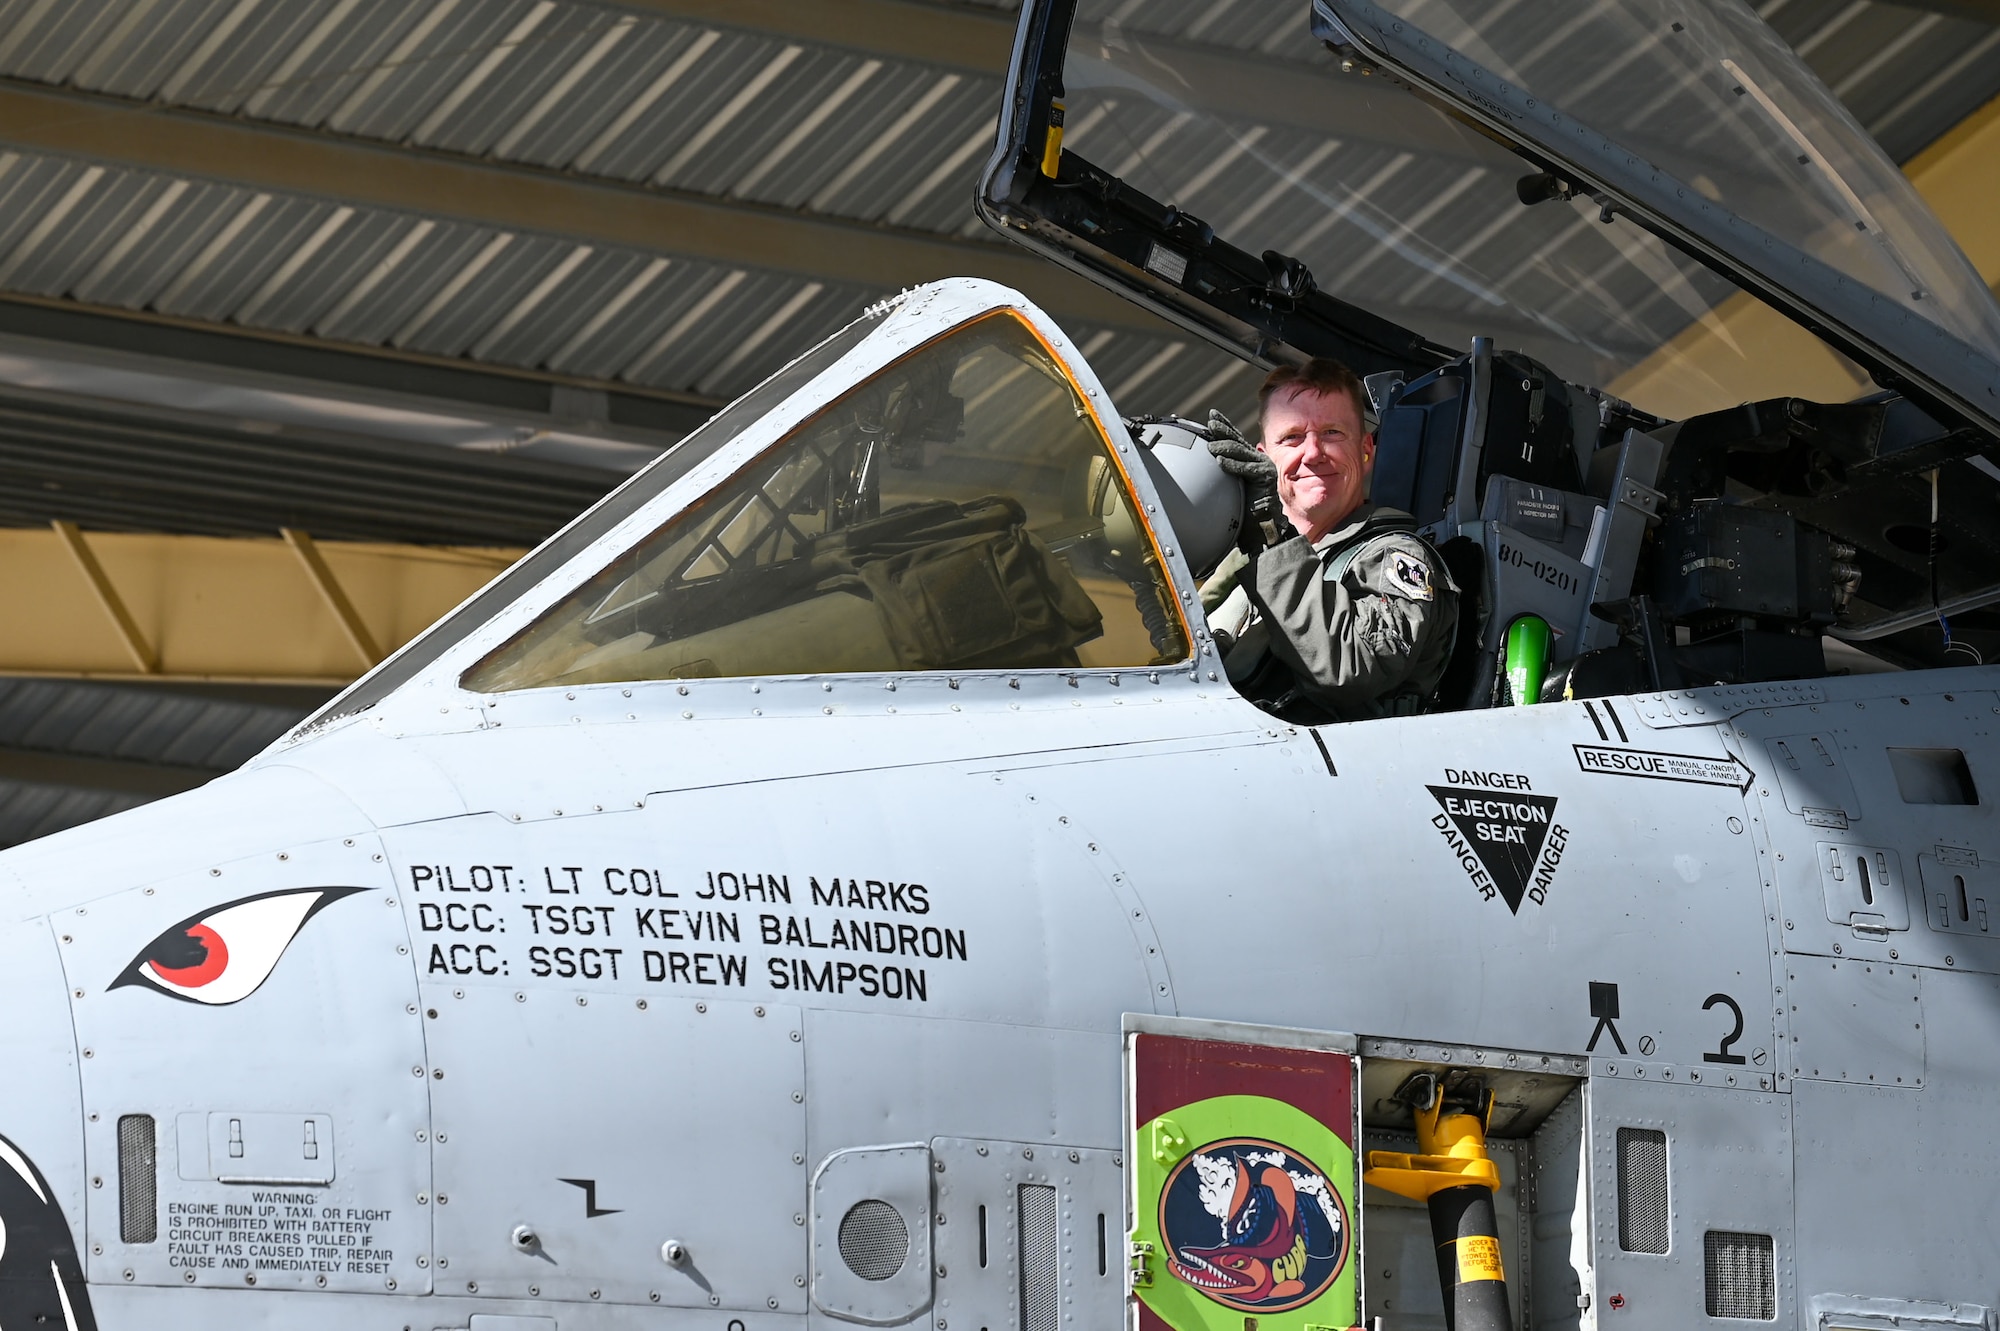 A man smiles from the cockpit of an A-10 Thunderbolt II attack aircraft while holding a helmet.